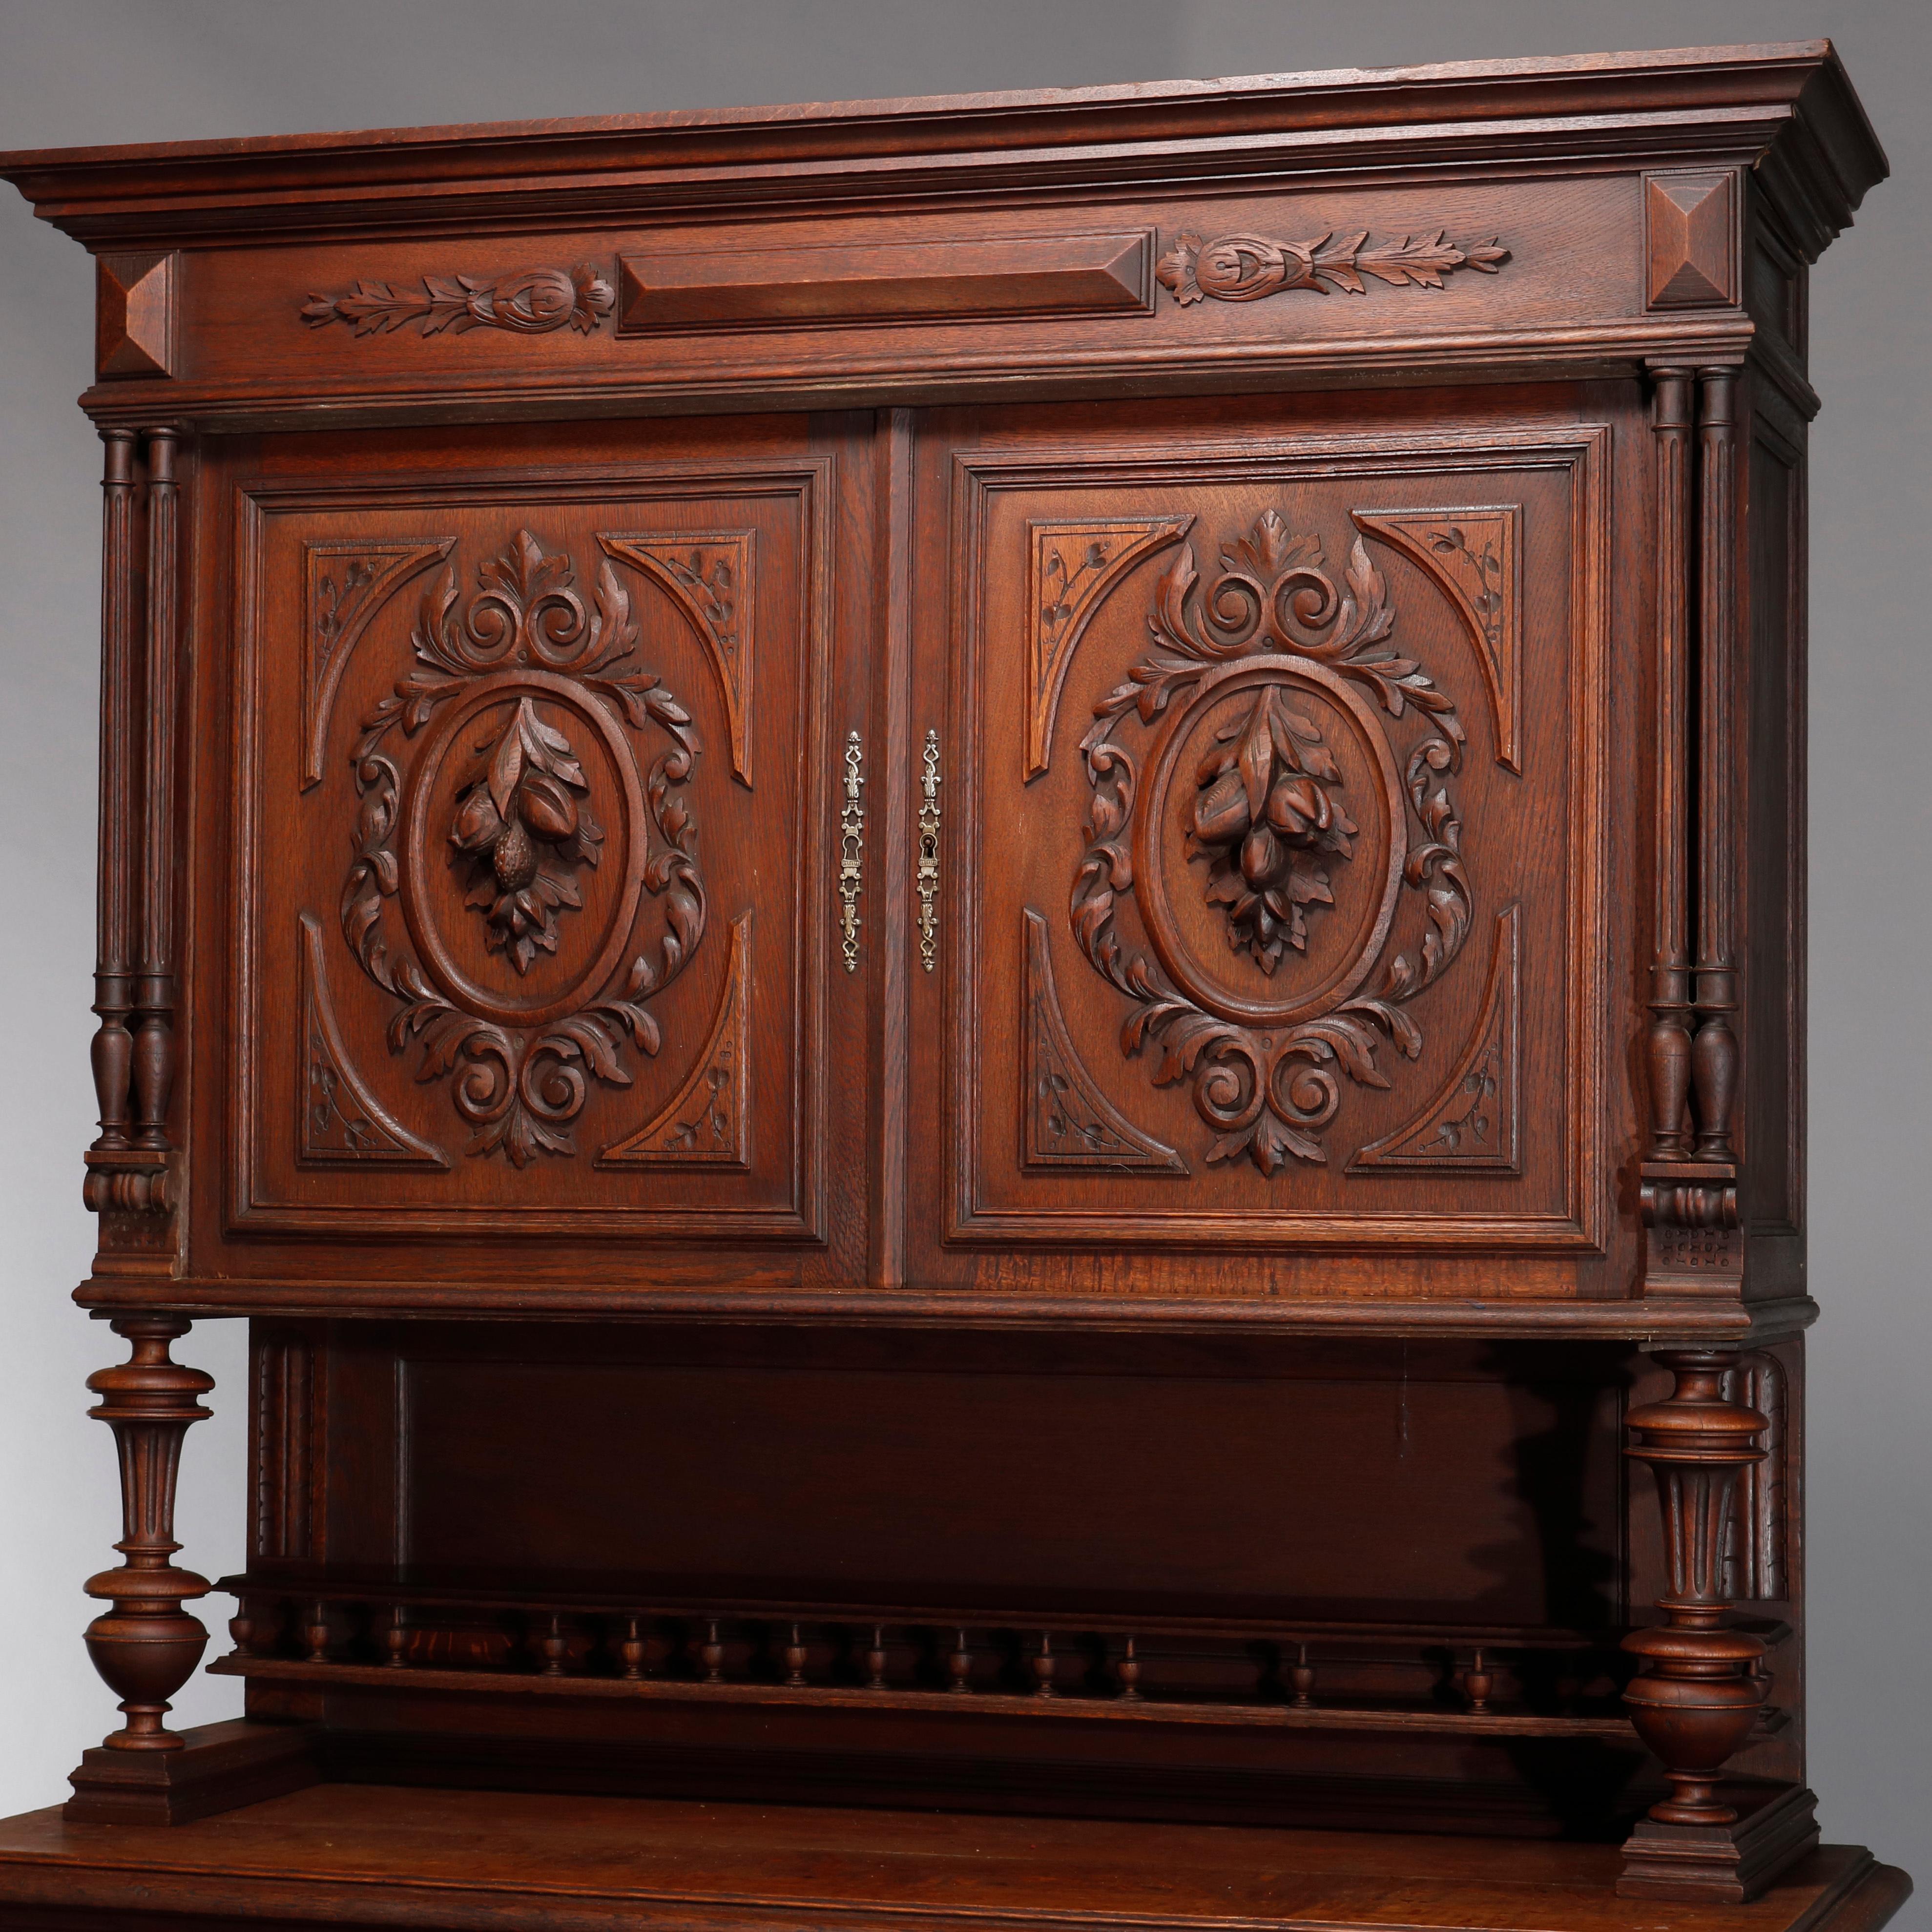 Antique French Renaissance deeply carved walnut court cupboard with gallery, scroll, gadroon, pyramidal, foliate and nut decoration, 19th century

Measures: 87